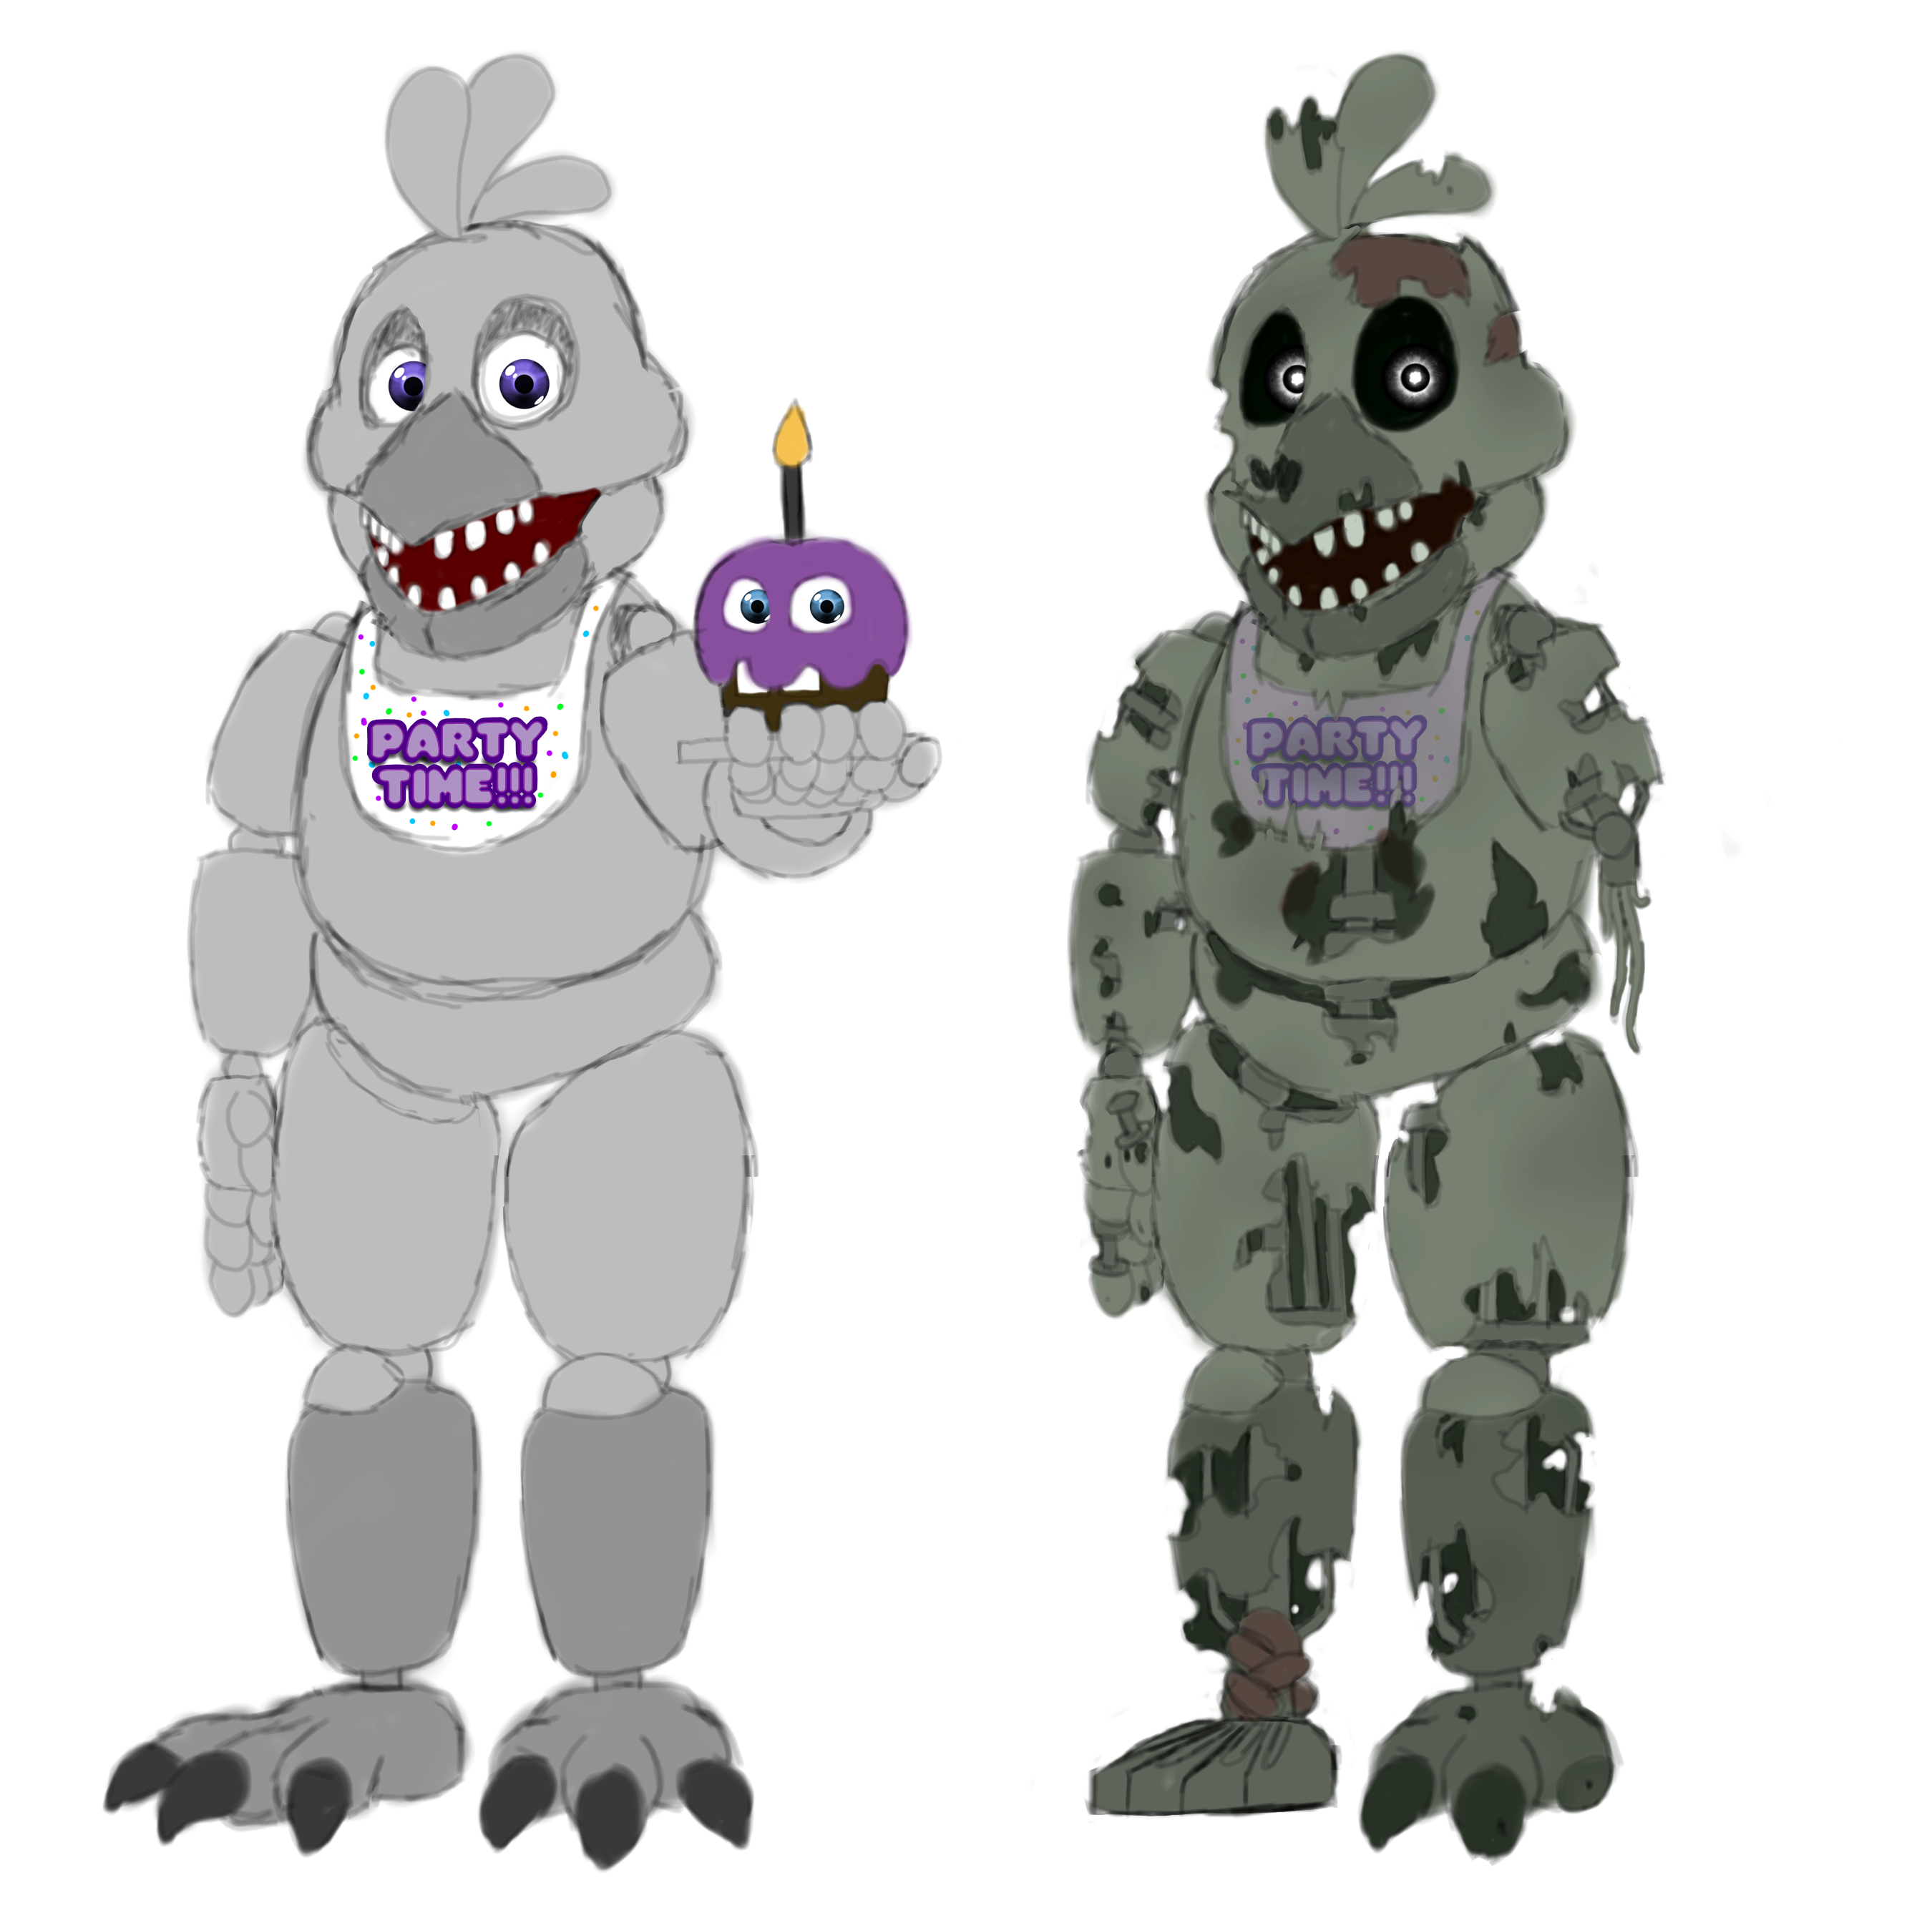 Pixilart - Withered Chica FNAF (WIP) by SilverShadow